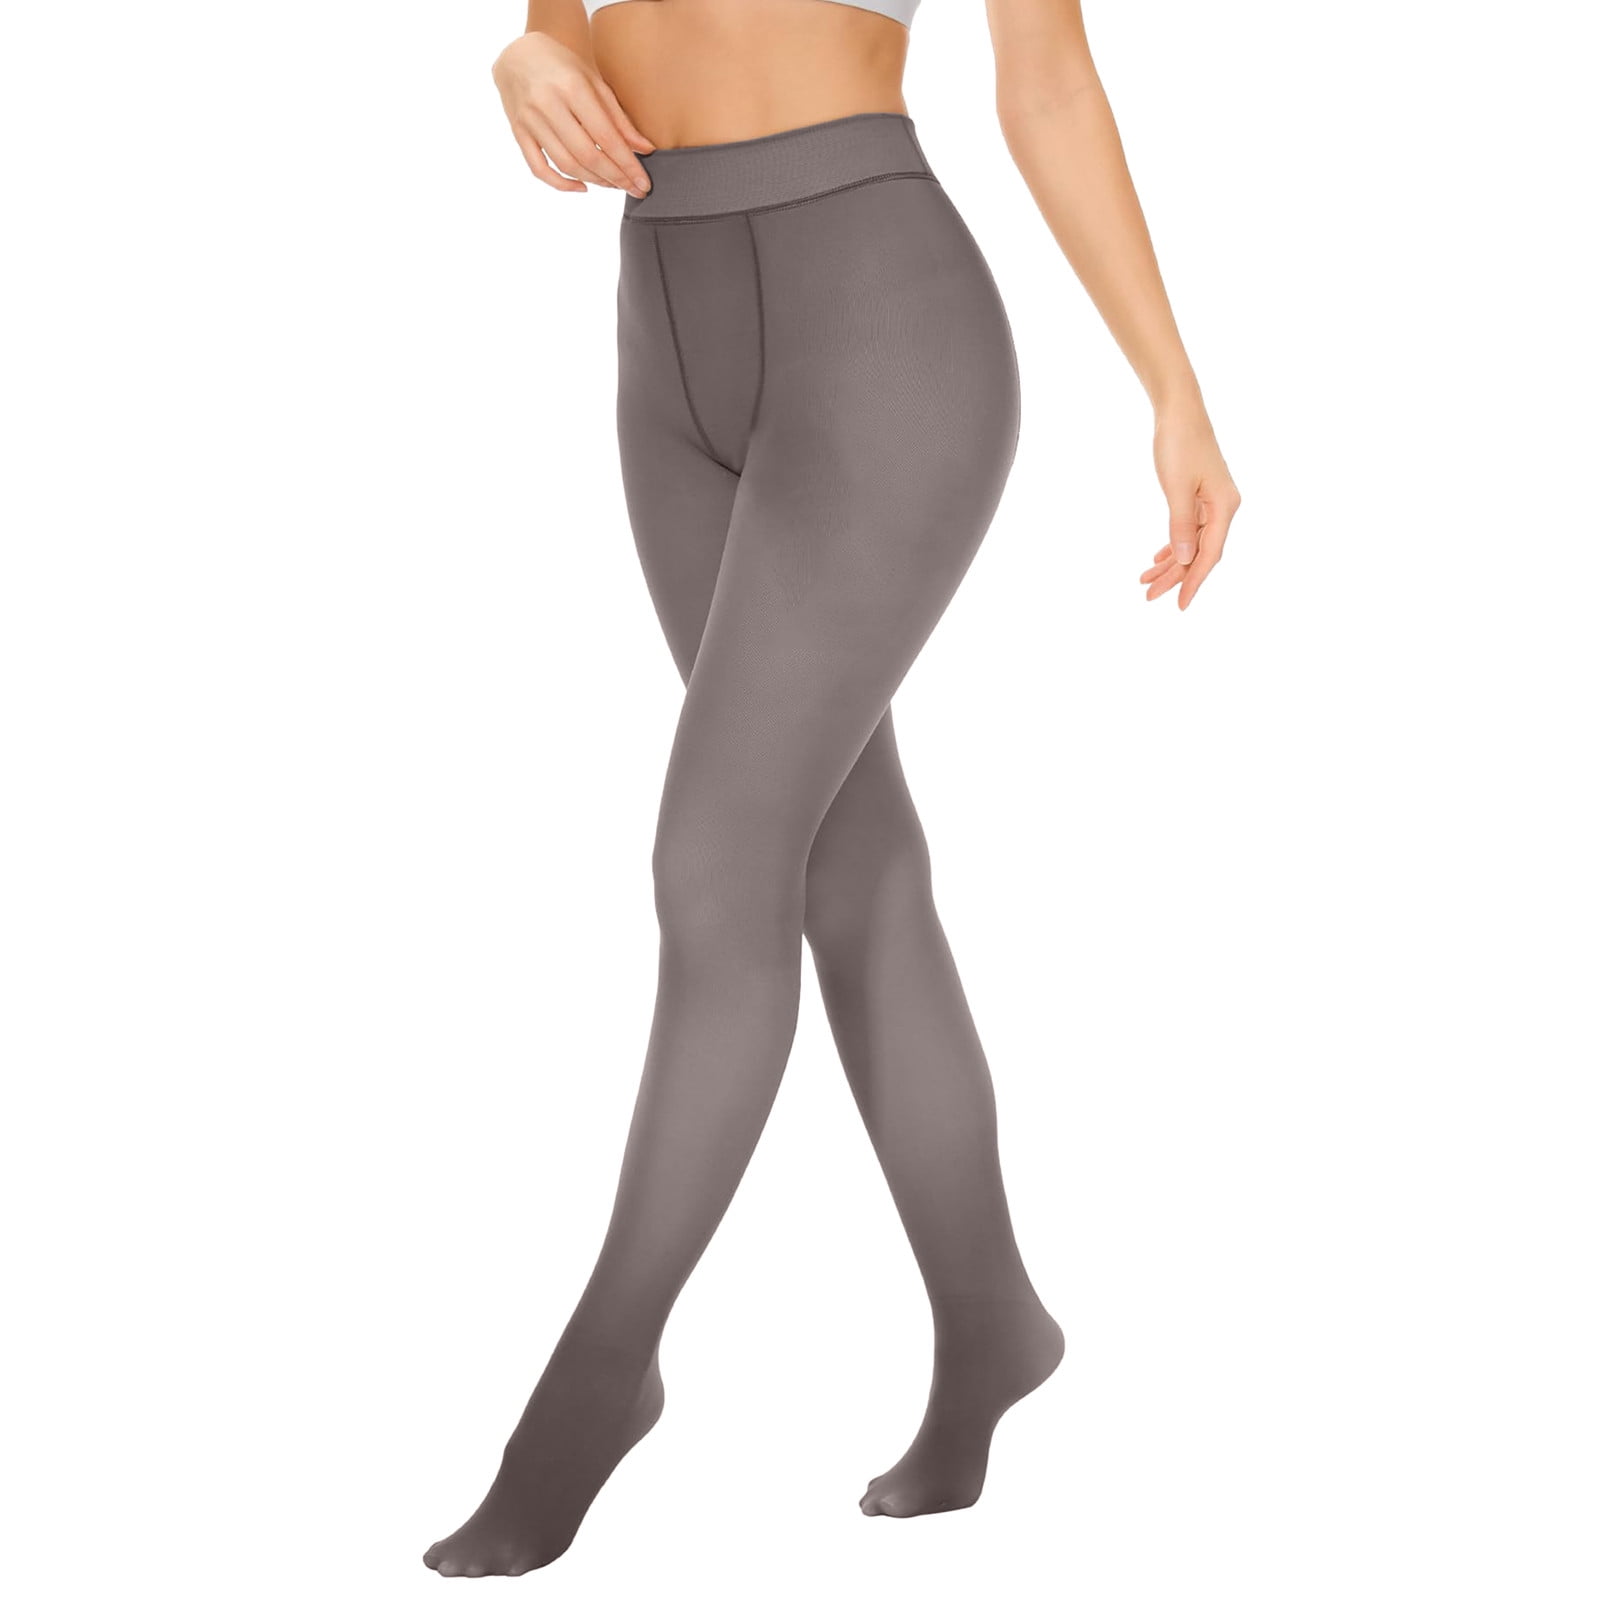 Uuszgmr Leggings For Women Thermal Tights Winter Lined Transparent